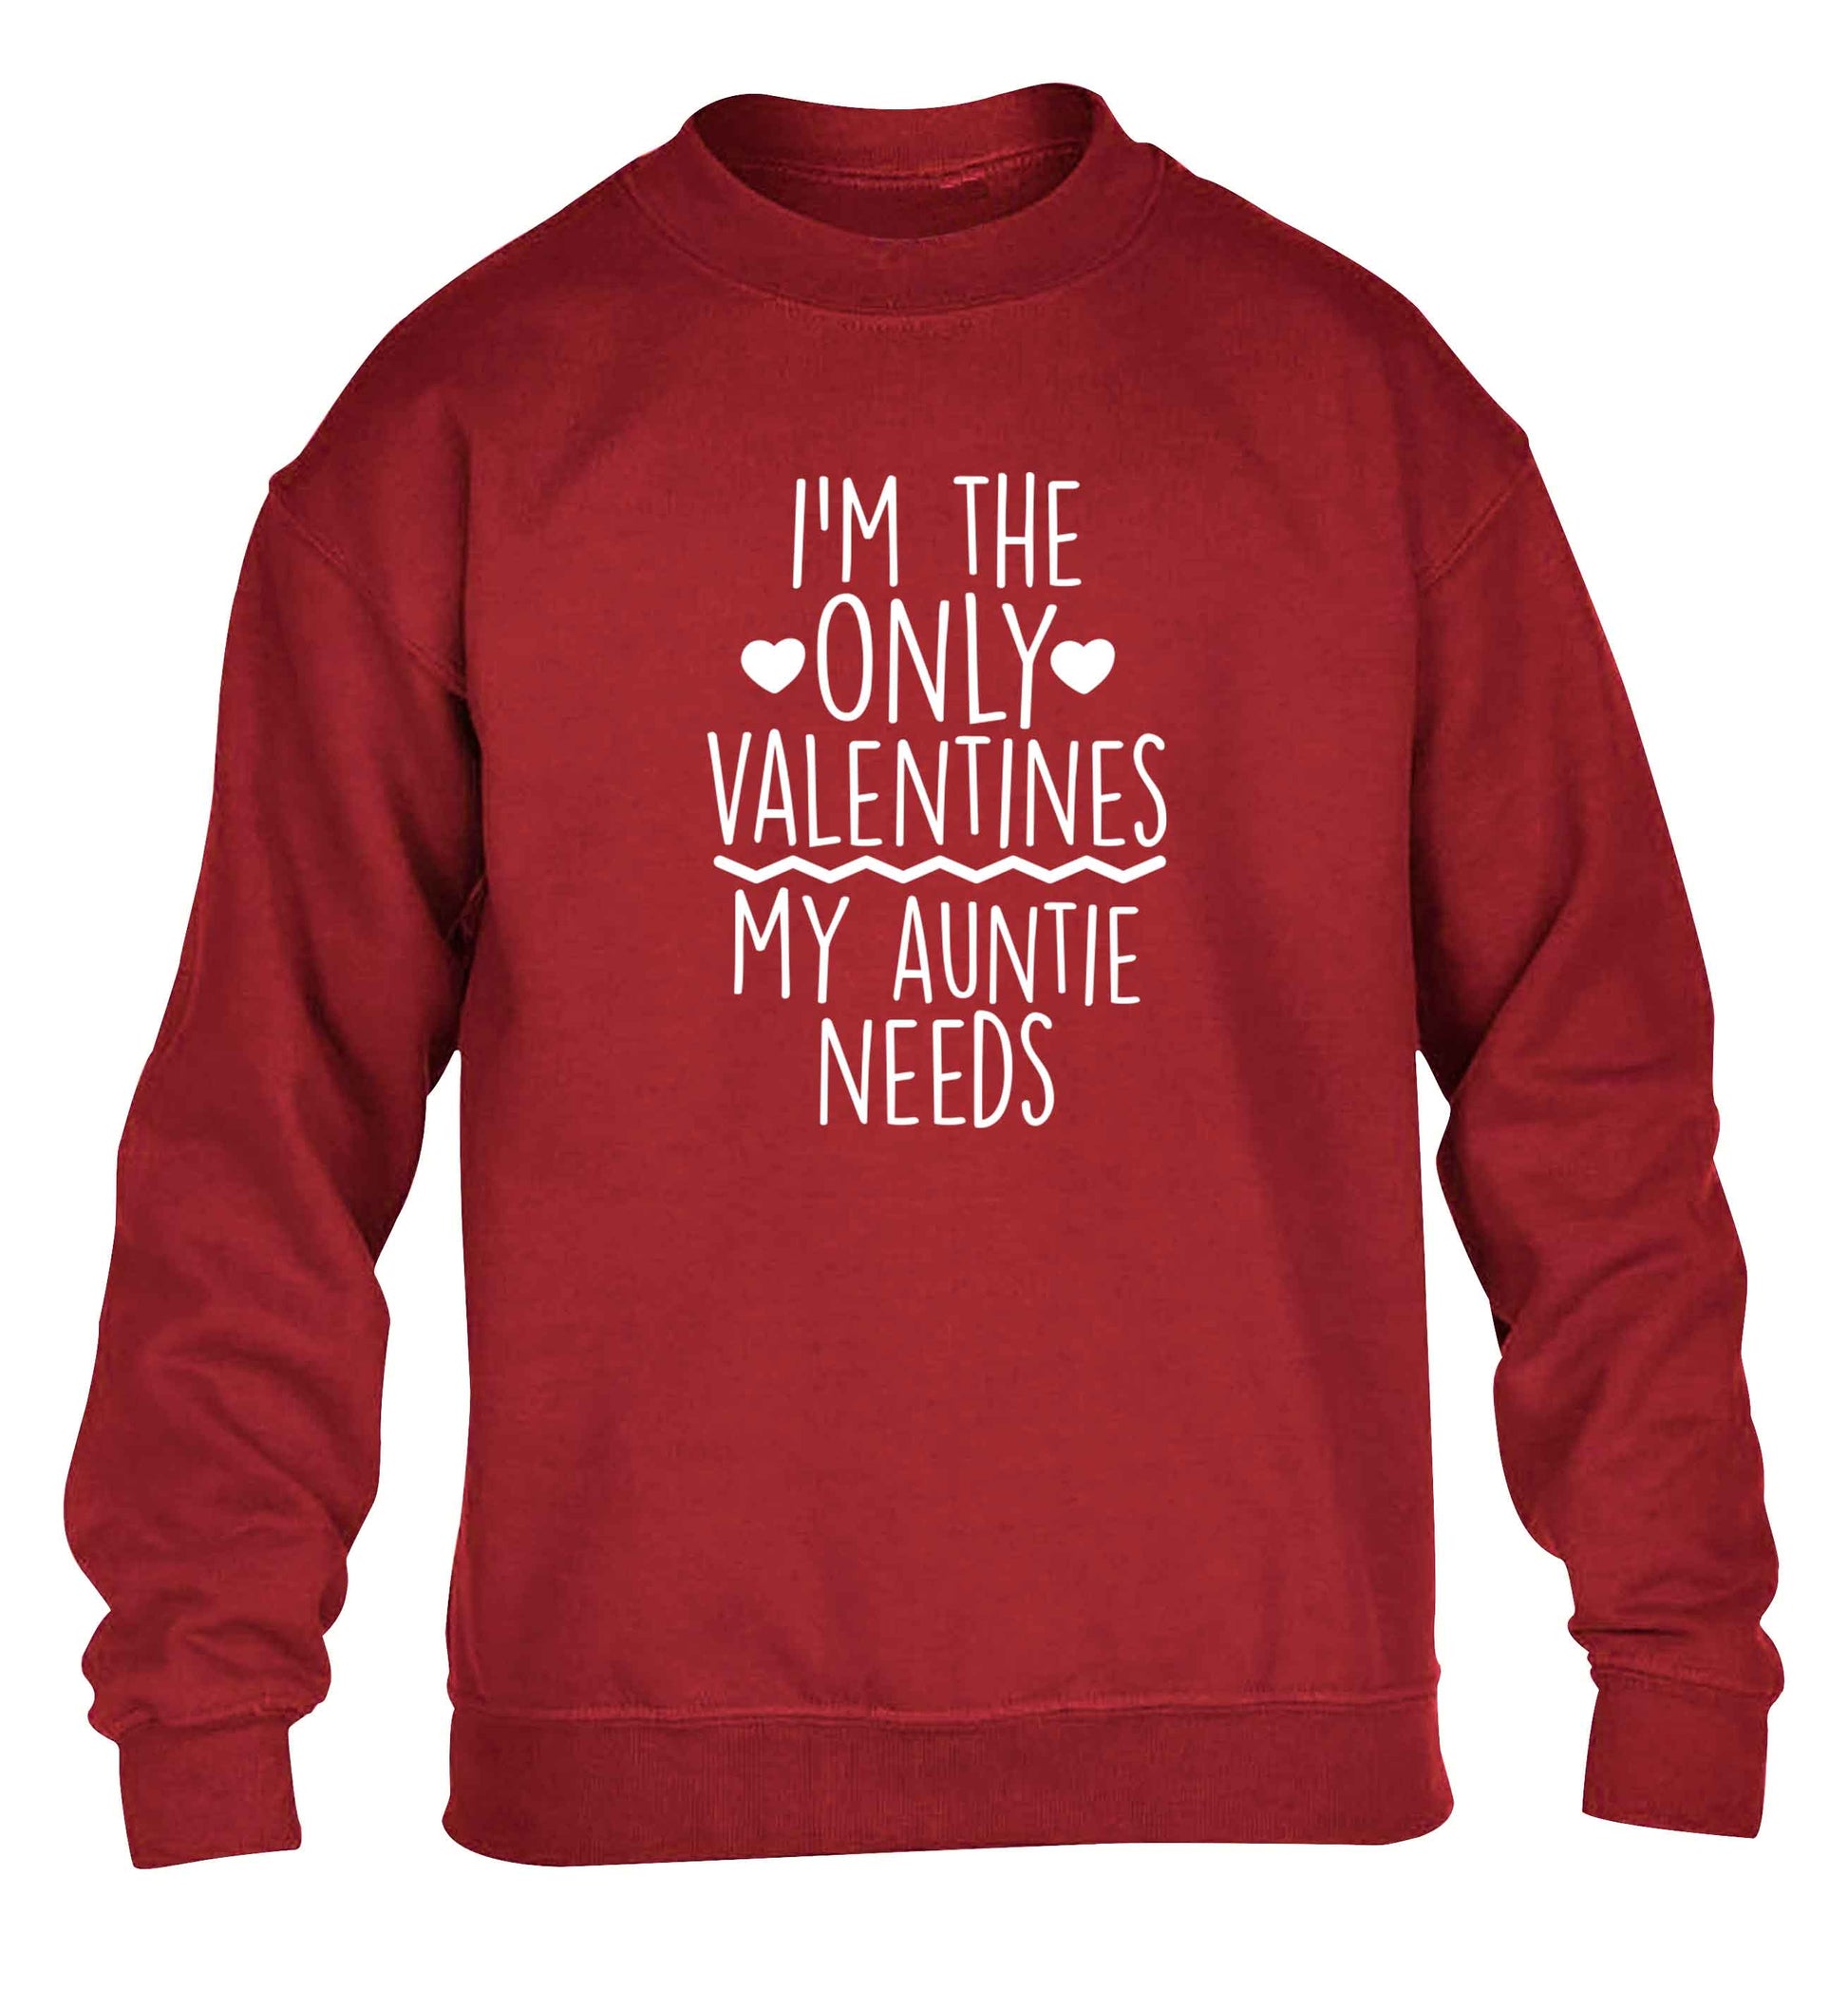 I'm the only valentines my auntie needs children's grey sweater 12-13 Years